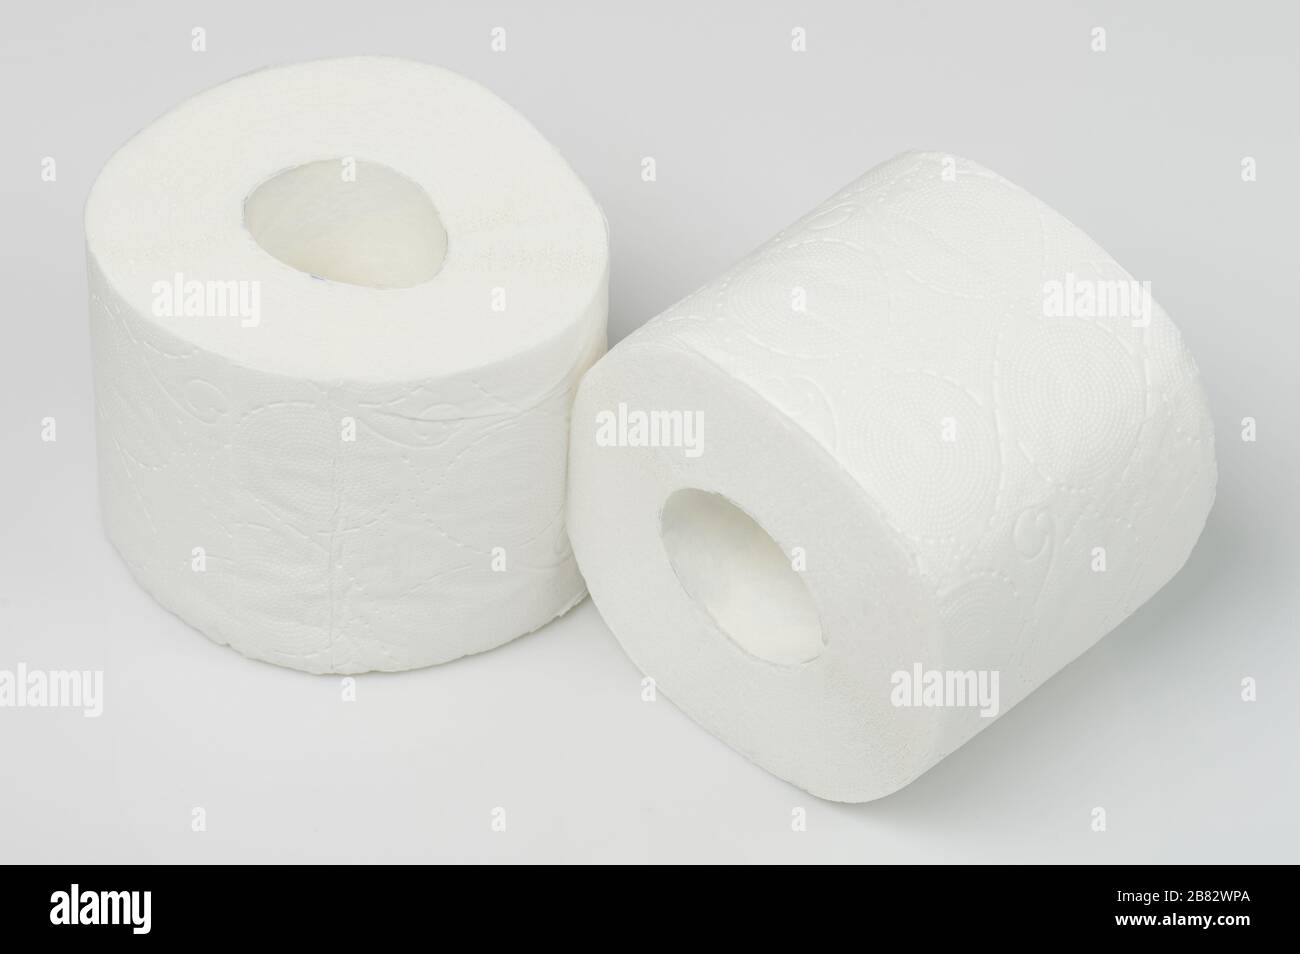 Two rolls of toilet paper isolated on white studio background Stock Photo